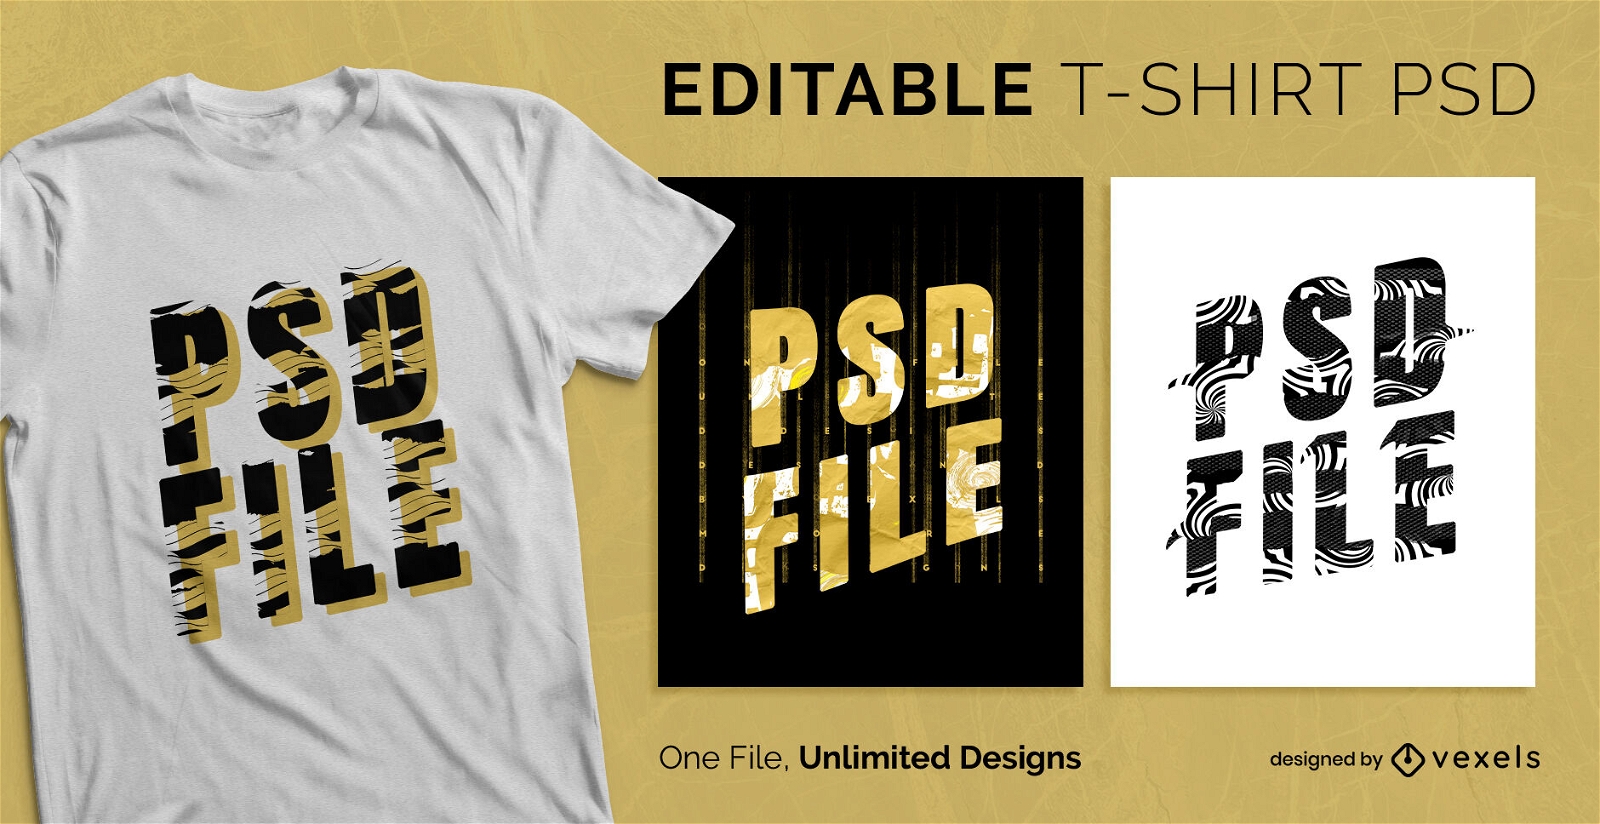 Texture on texts scalable t-shirt psd